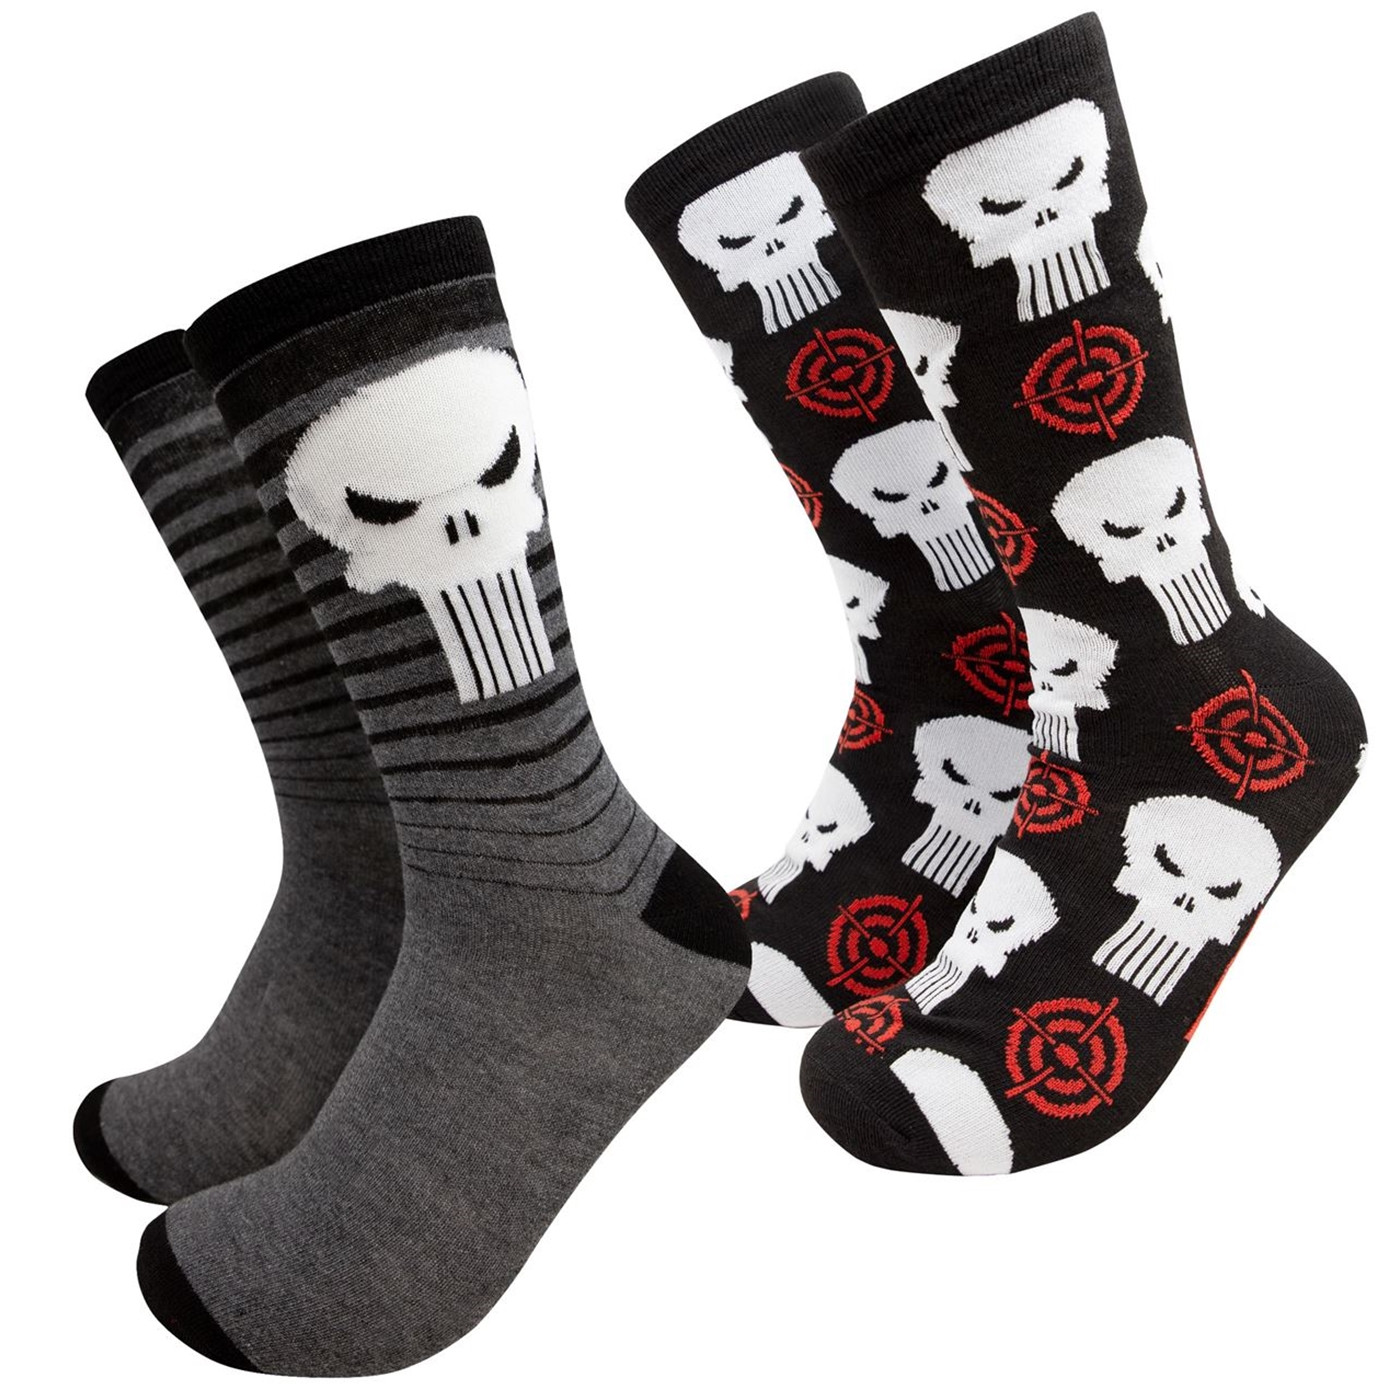 Punisher Gradient and Symbols and Sights Men's 2-Pack Crew Socks